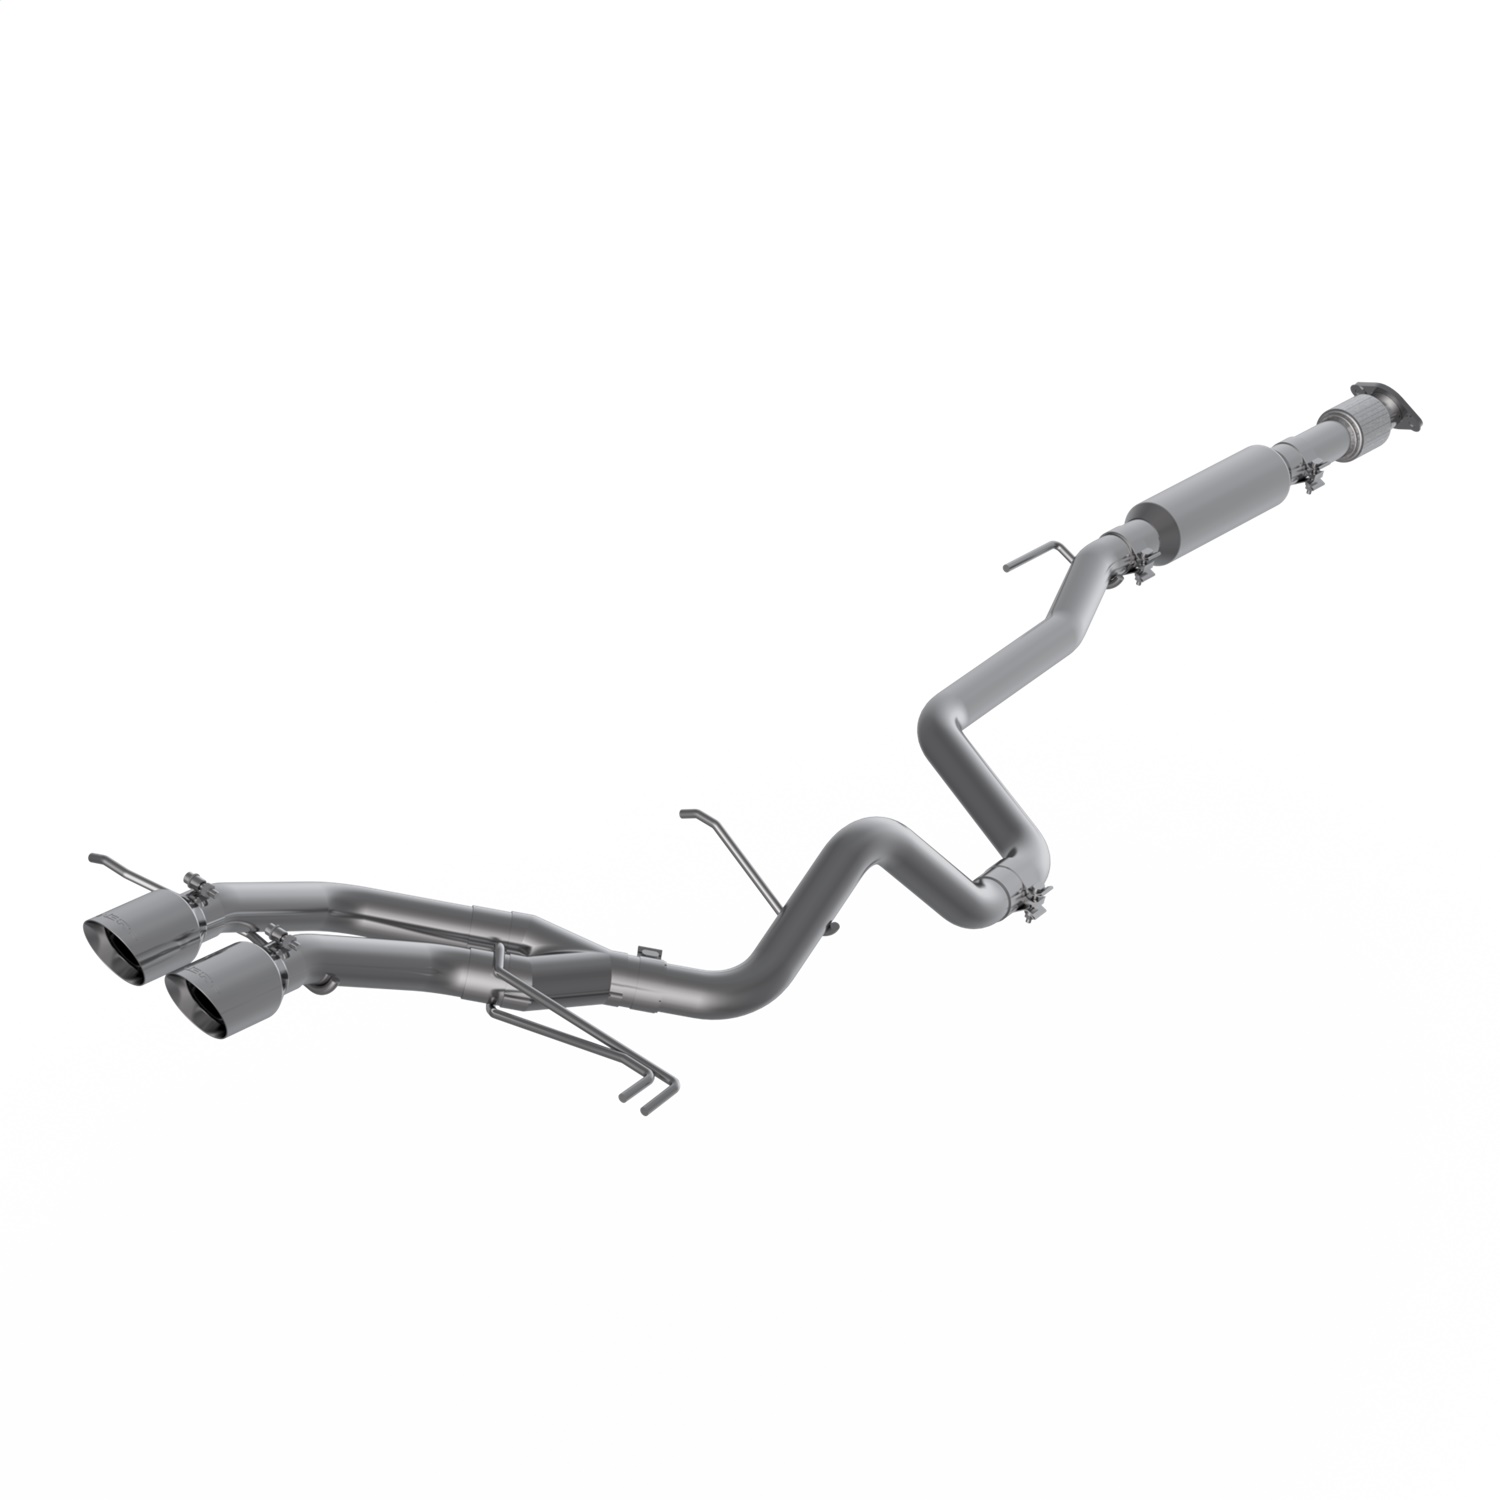 MBRP Exhaust S4703AL Armor Lite Cat Back Exhaust System Fits 13-17 Veloster